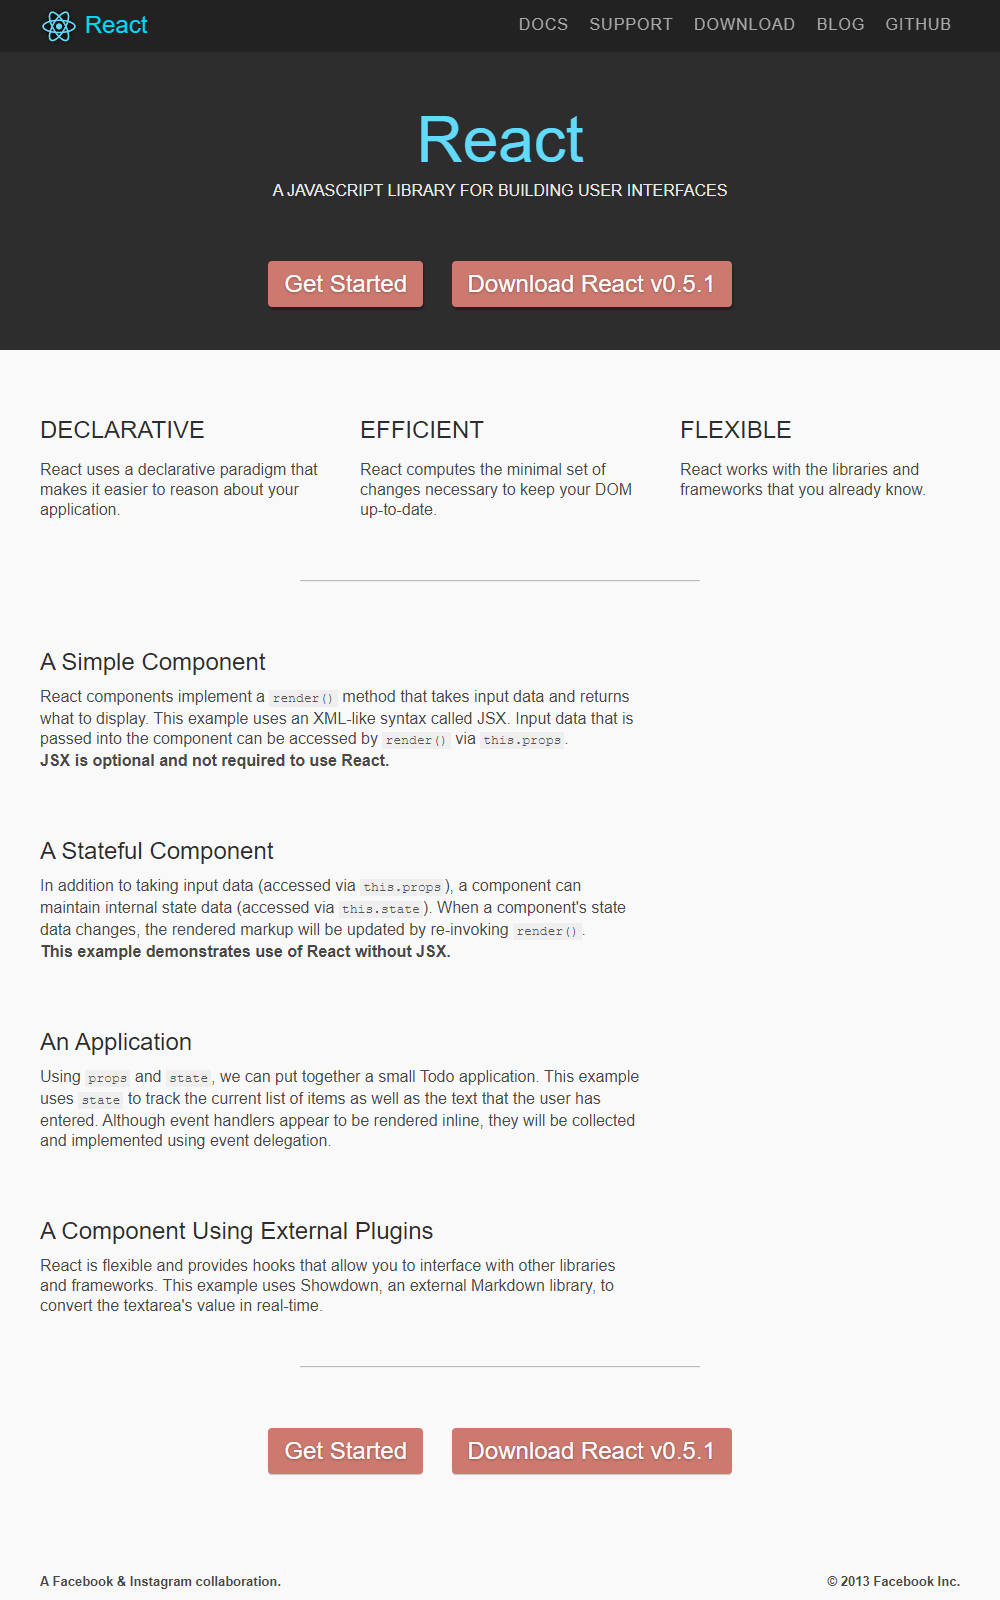 React official website in 2013